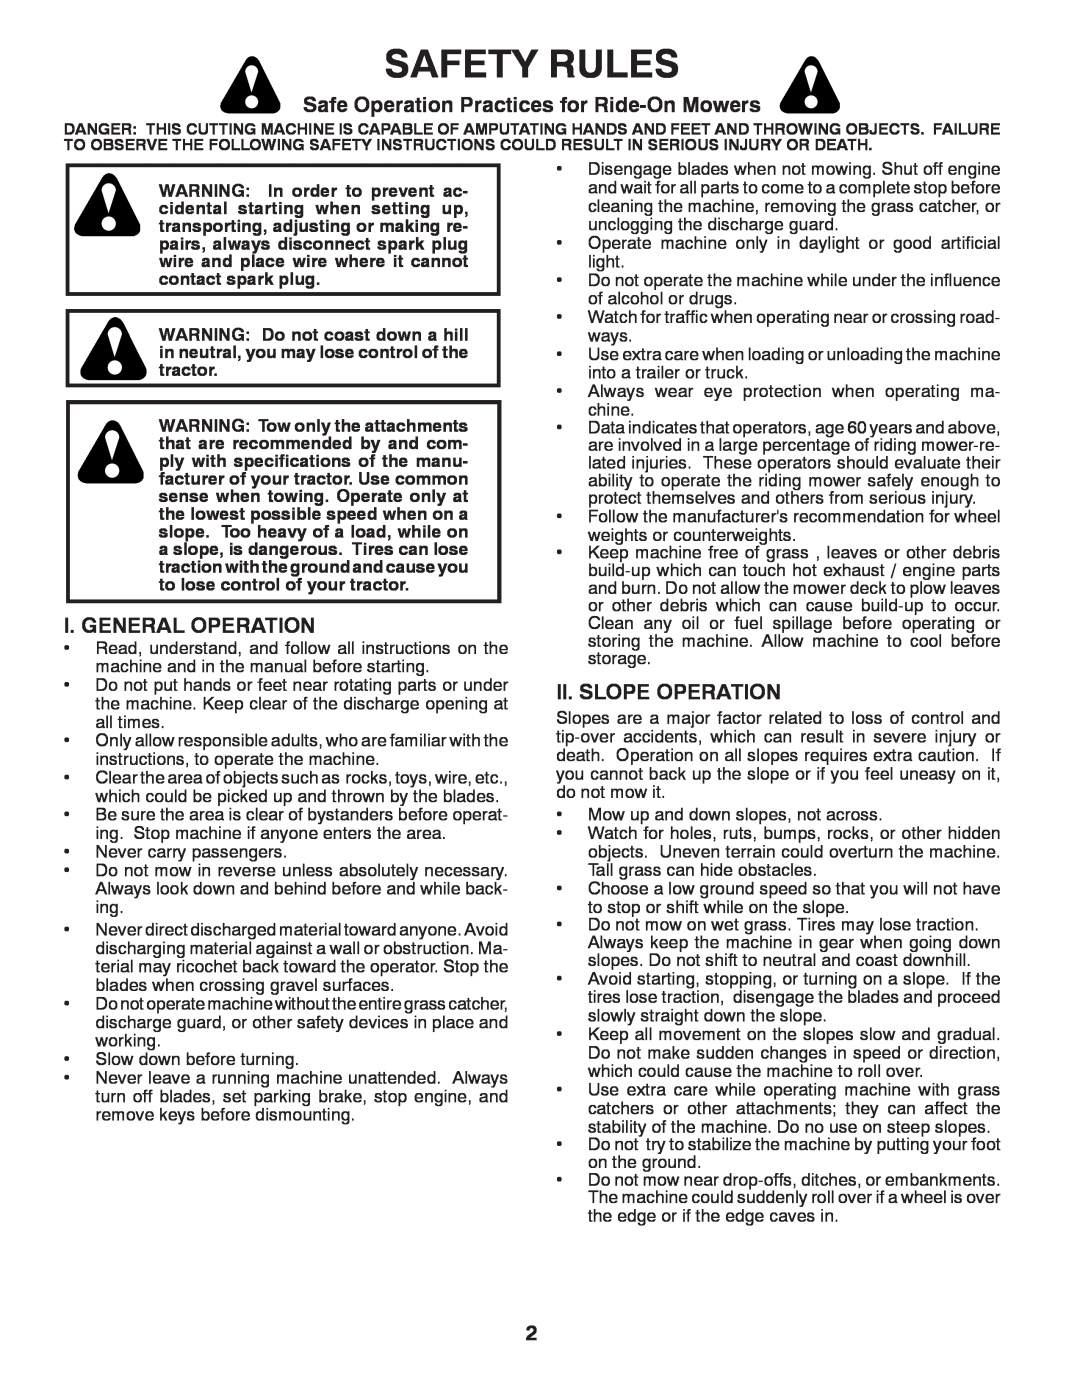 Husqvarna LTH1797 Safety Rules, Safe Operation Practices for Ride-On Mowers, I. General Operation, Ii. Slope Operation 